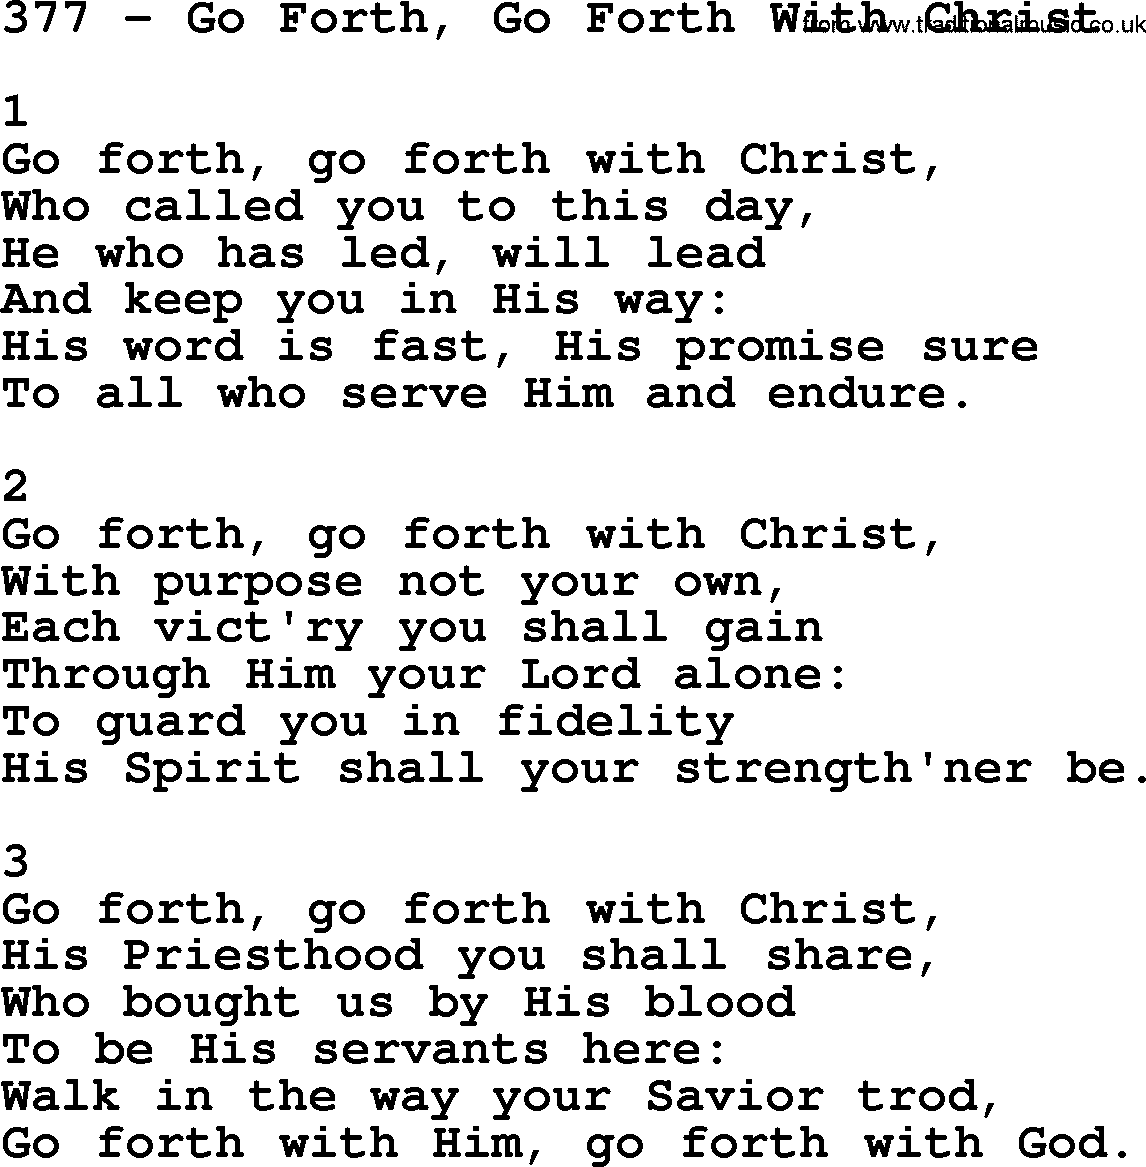 Complete Adventis Hymnal, title: 377-Go Forth, Go Forth With Christ, with lyrics, midi, mp3, powerpoints(PPT) and PDF,